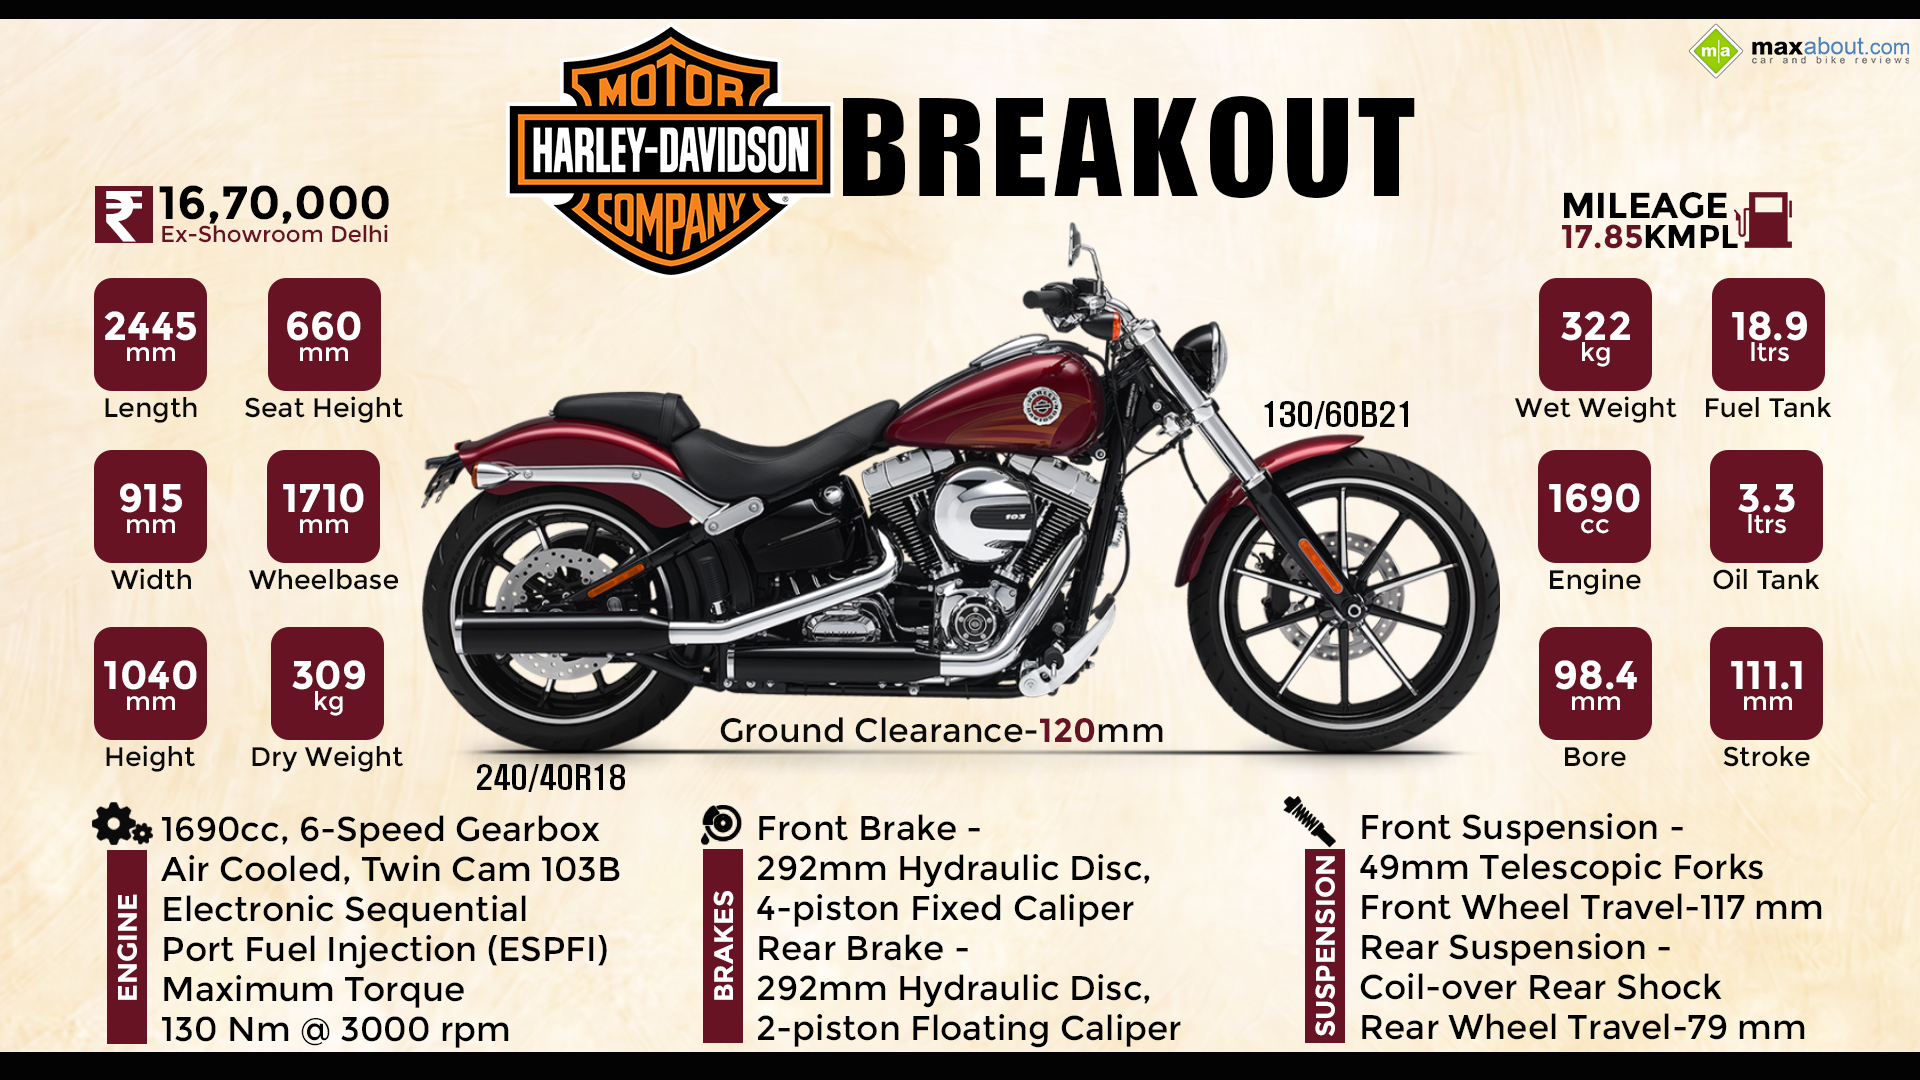 Quick Facts About Harley Davidson Breakout